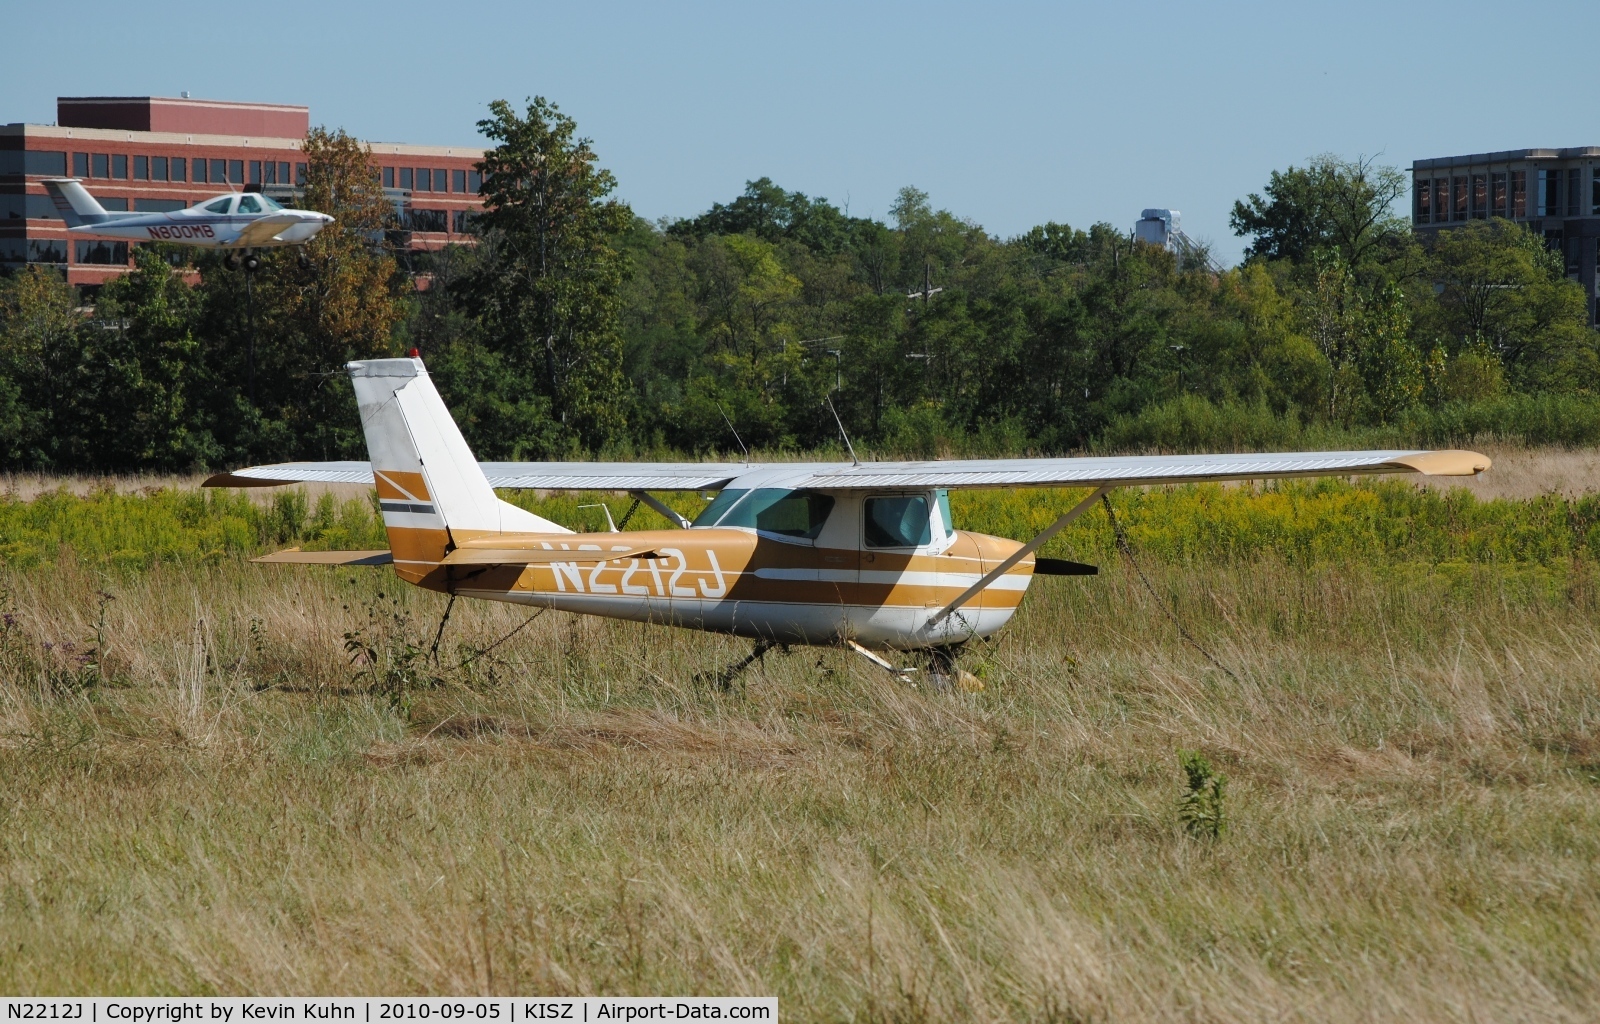 N2212J, 1966 Cessna 150G C/N 15065412, Derelict at Blue Ash. Flamingo Air's Skipper on final in the background.